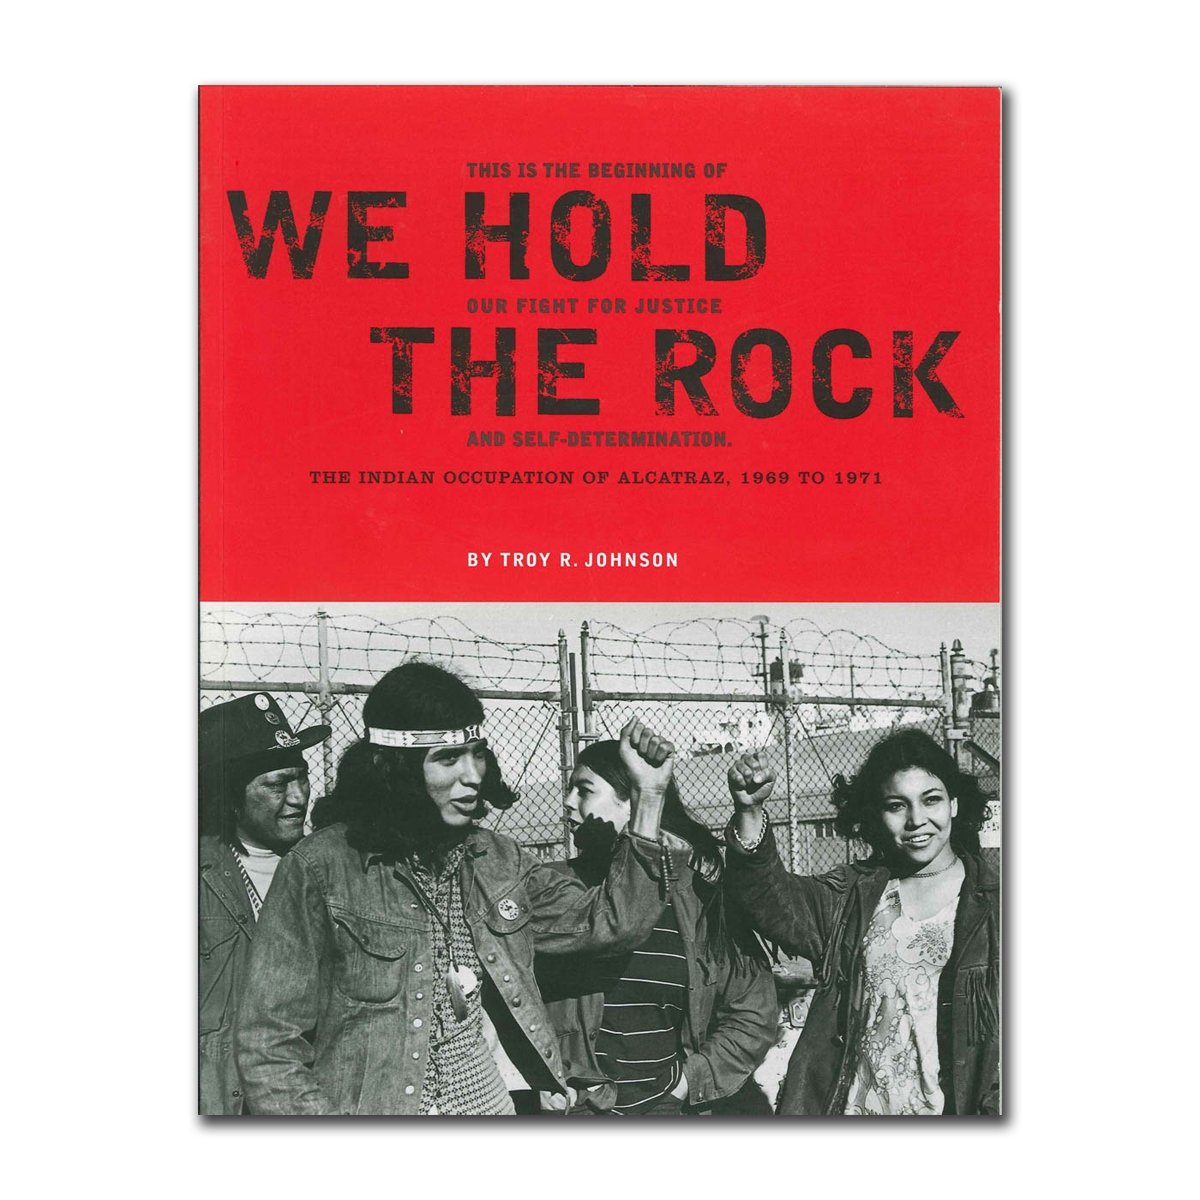 We Hold the Rock book by Troy R. Johnson, history of the Indian Occupation of Alcatraz 1969 to 1971.